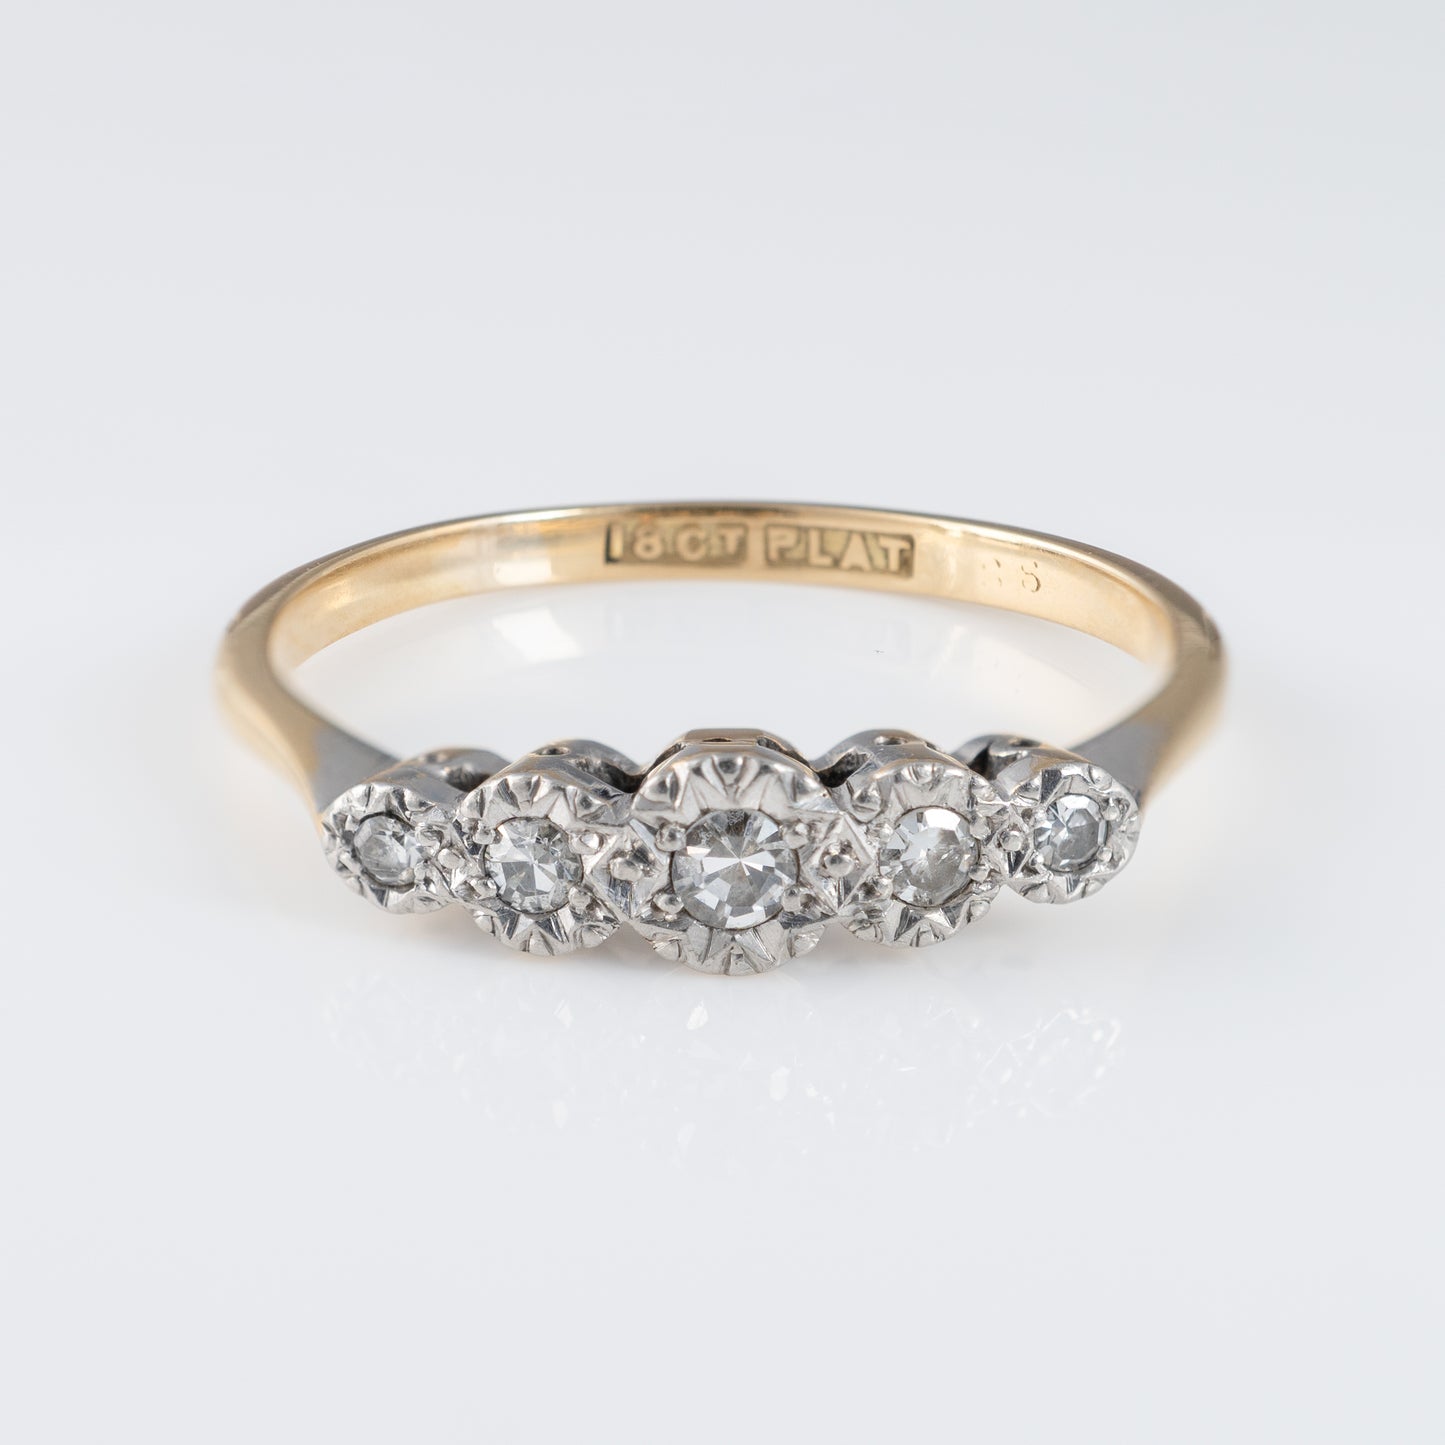 Pre-Owned 18ct Gold Five Stone Diamond Ring Size M